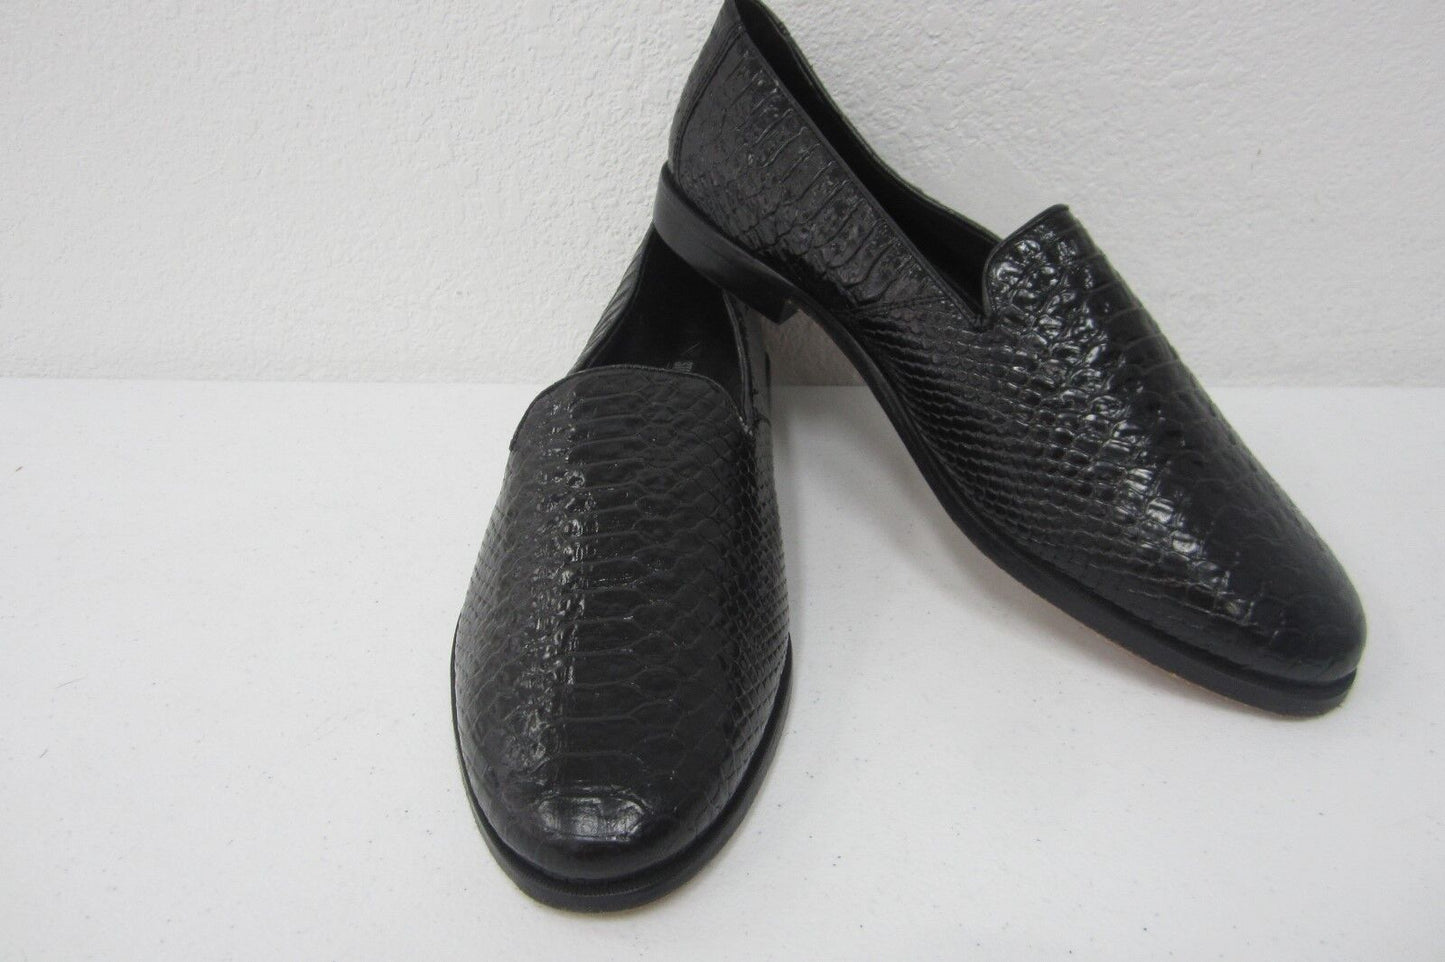 Stacy Adams Black Leather Croc Embossed Slip On Loafers Men’s Dress Shoes 11 M